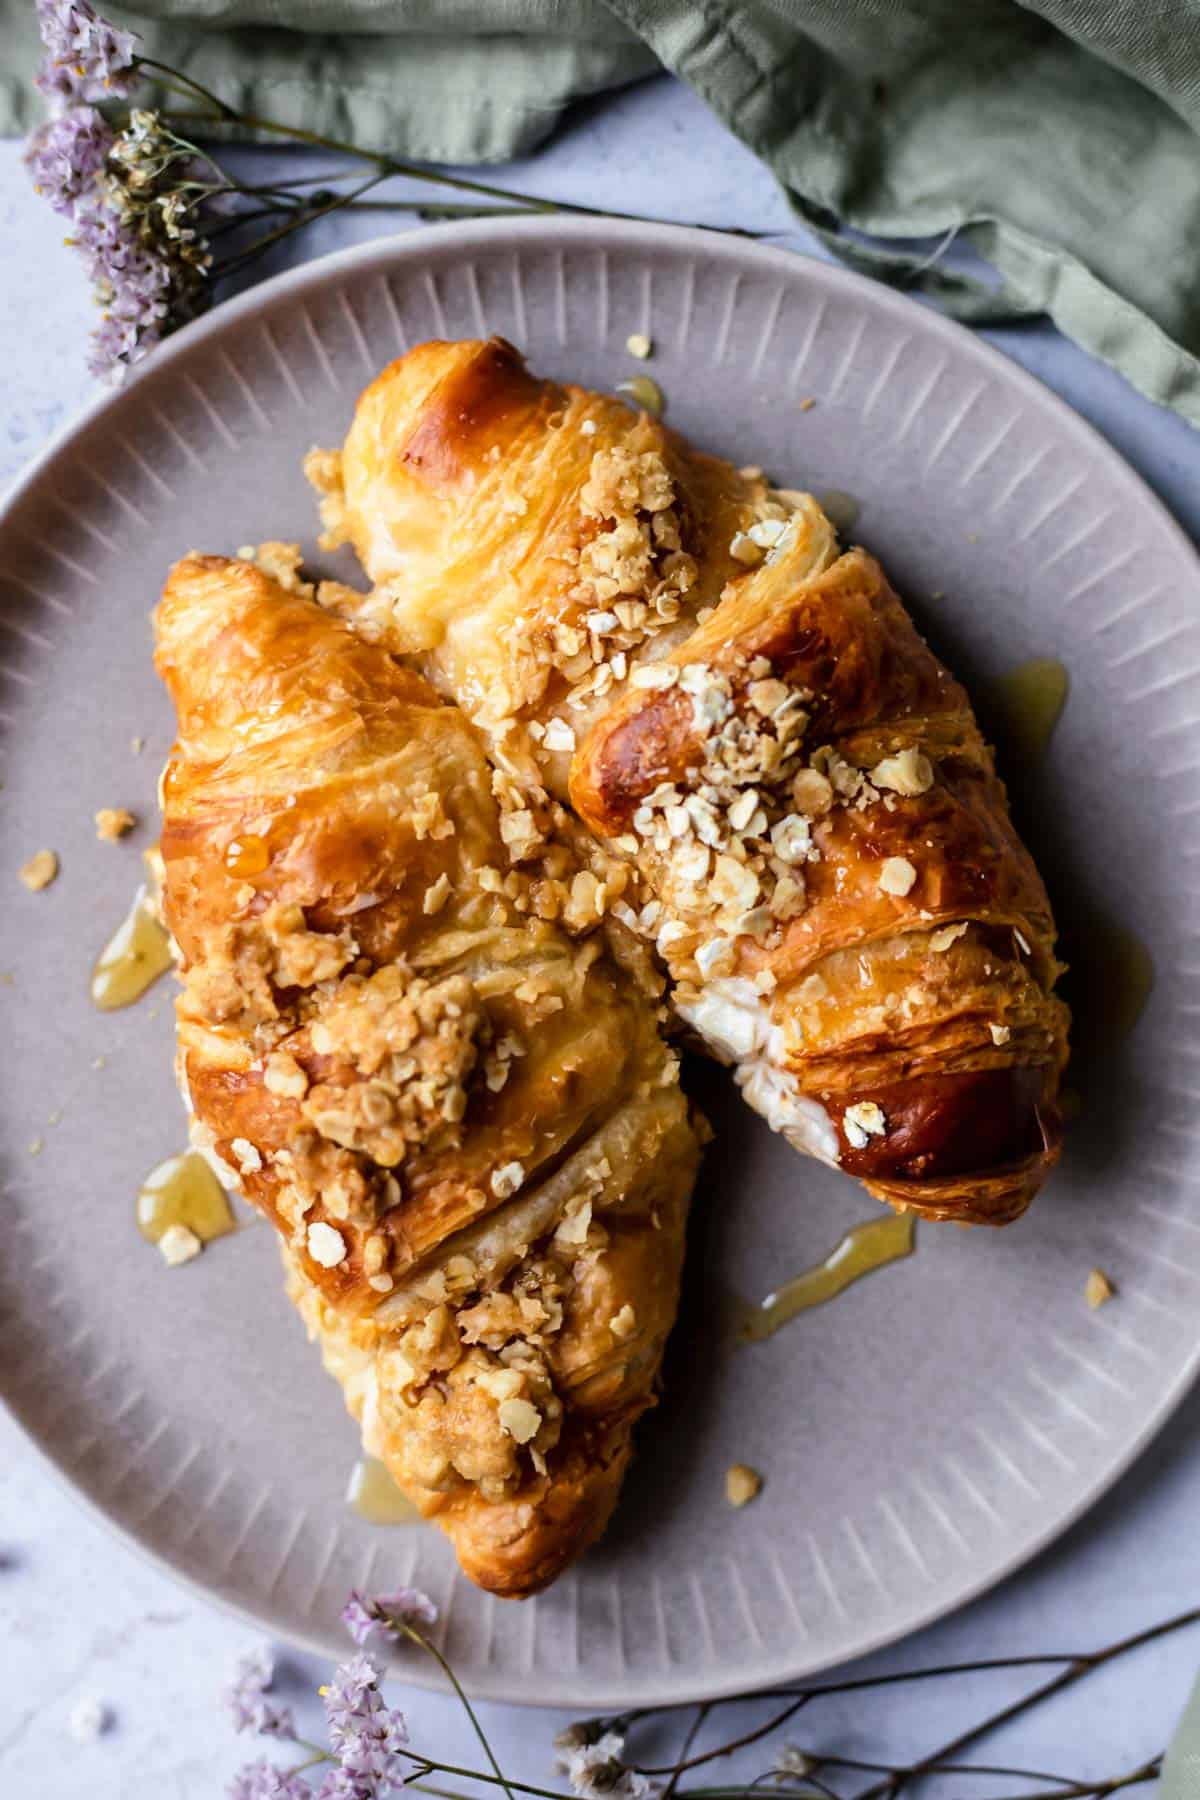 two cinnamon crisp apple french toast bake croissants on a plate